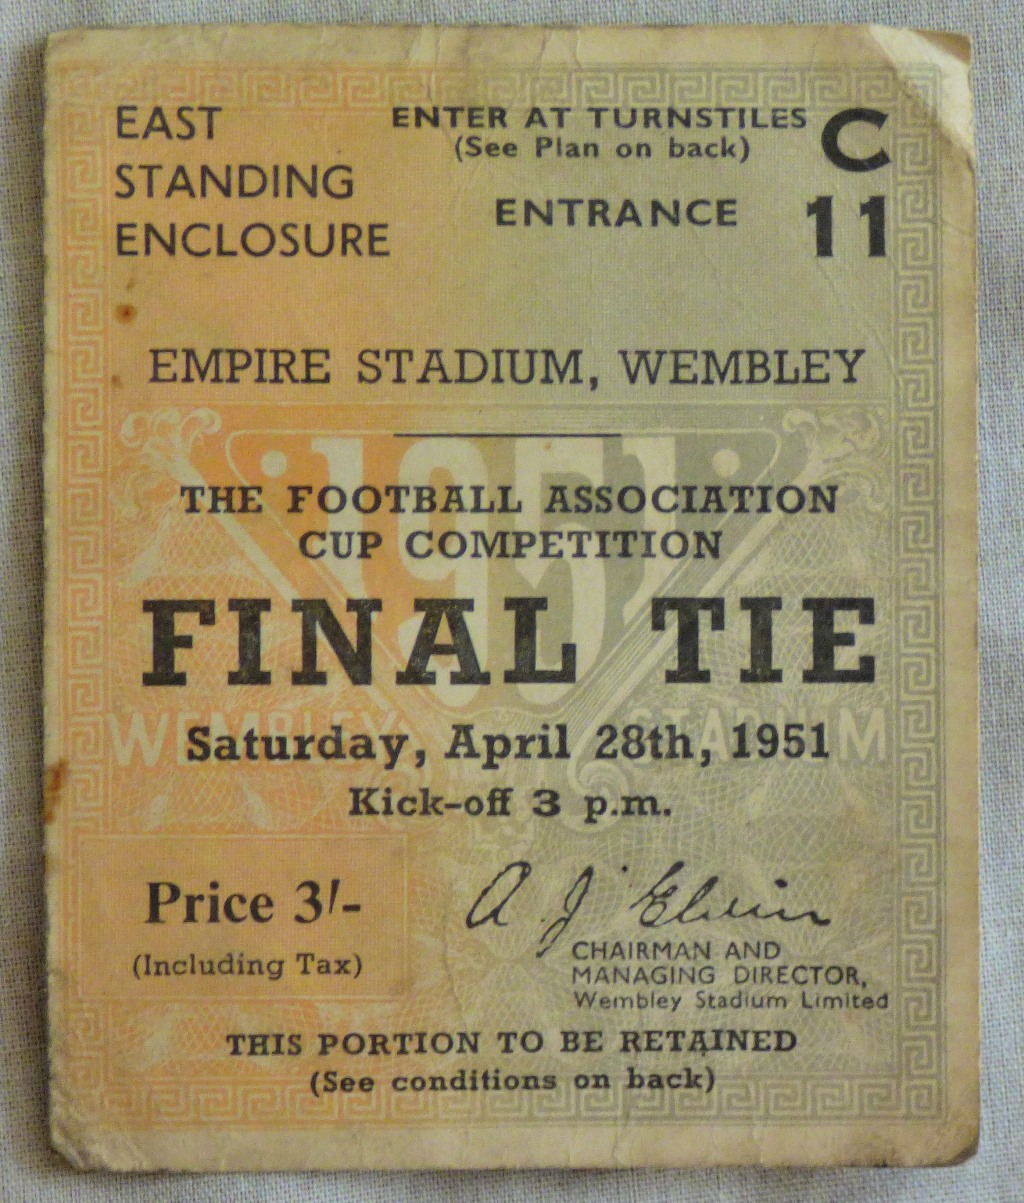 Empire Stadium-Wembley-The Football Association Cup Competition-Final Tie, Saturday April 28th - Image 2 of 4